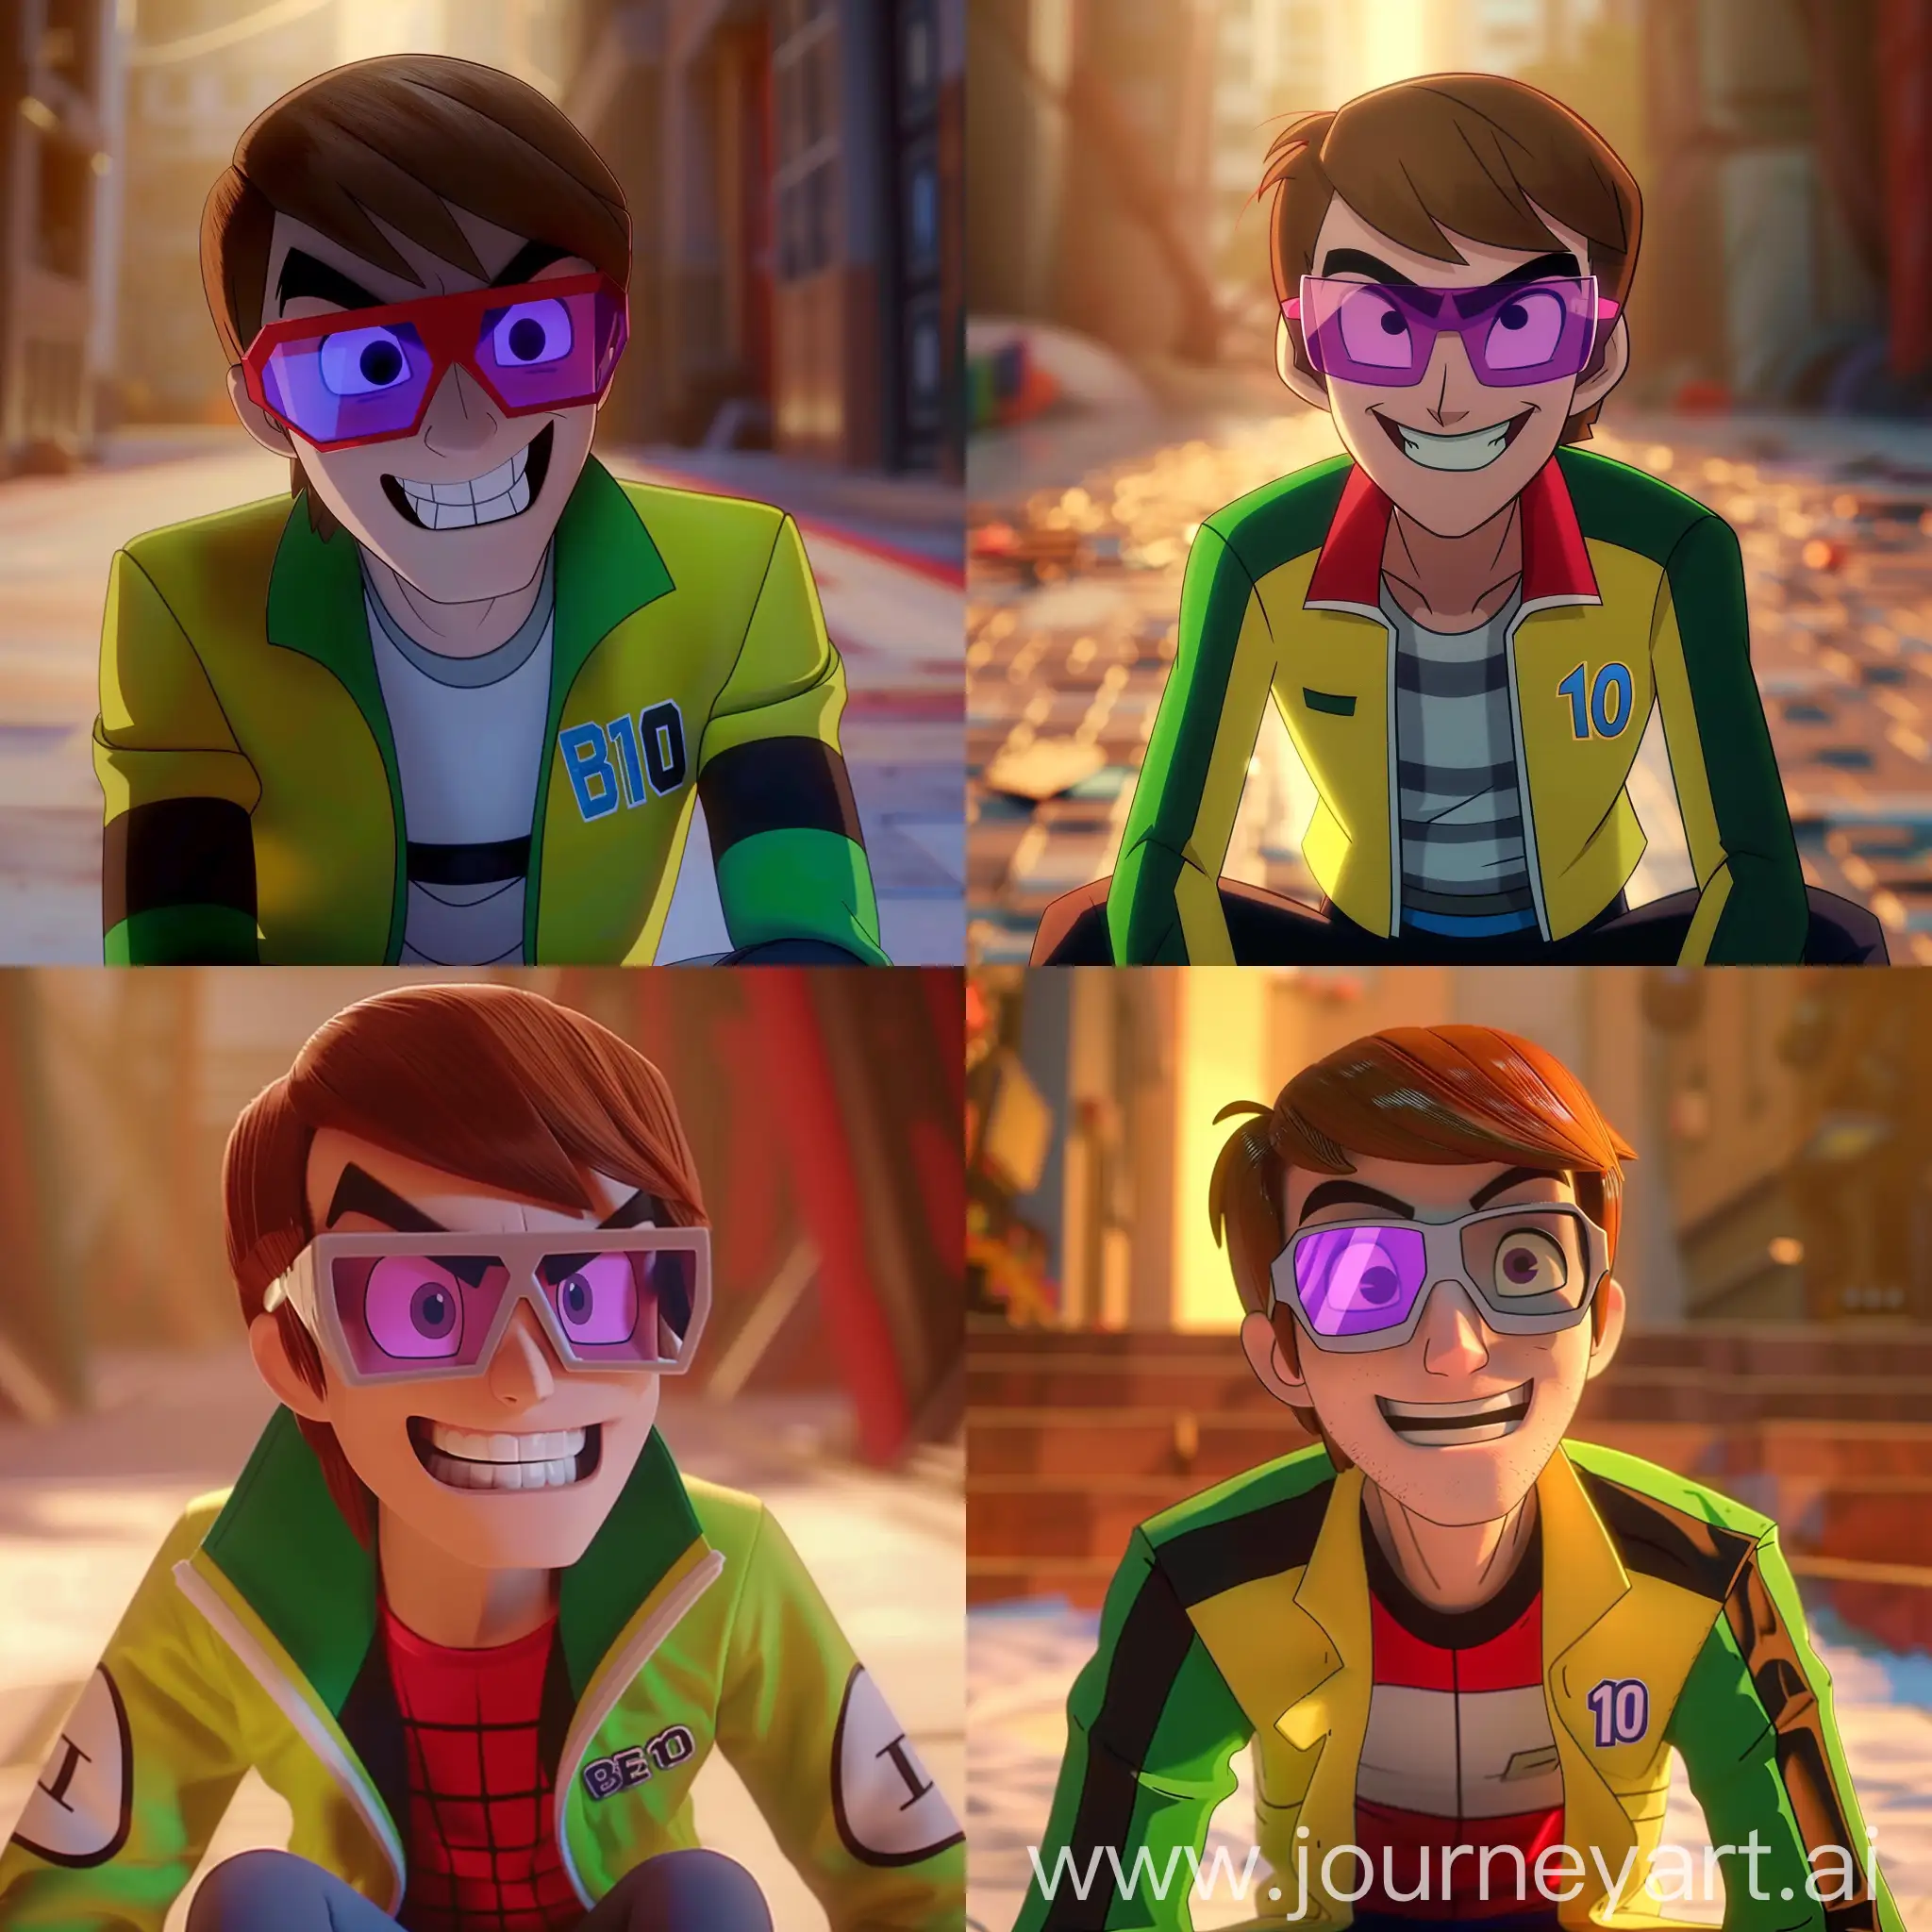 Smirking-Ben-10-Animated-Character-in-Yellow-Jacket-with-Purple-and-Grey-Glasses